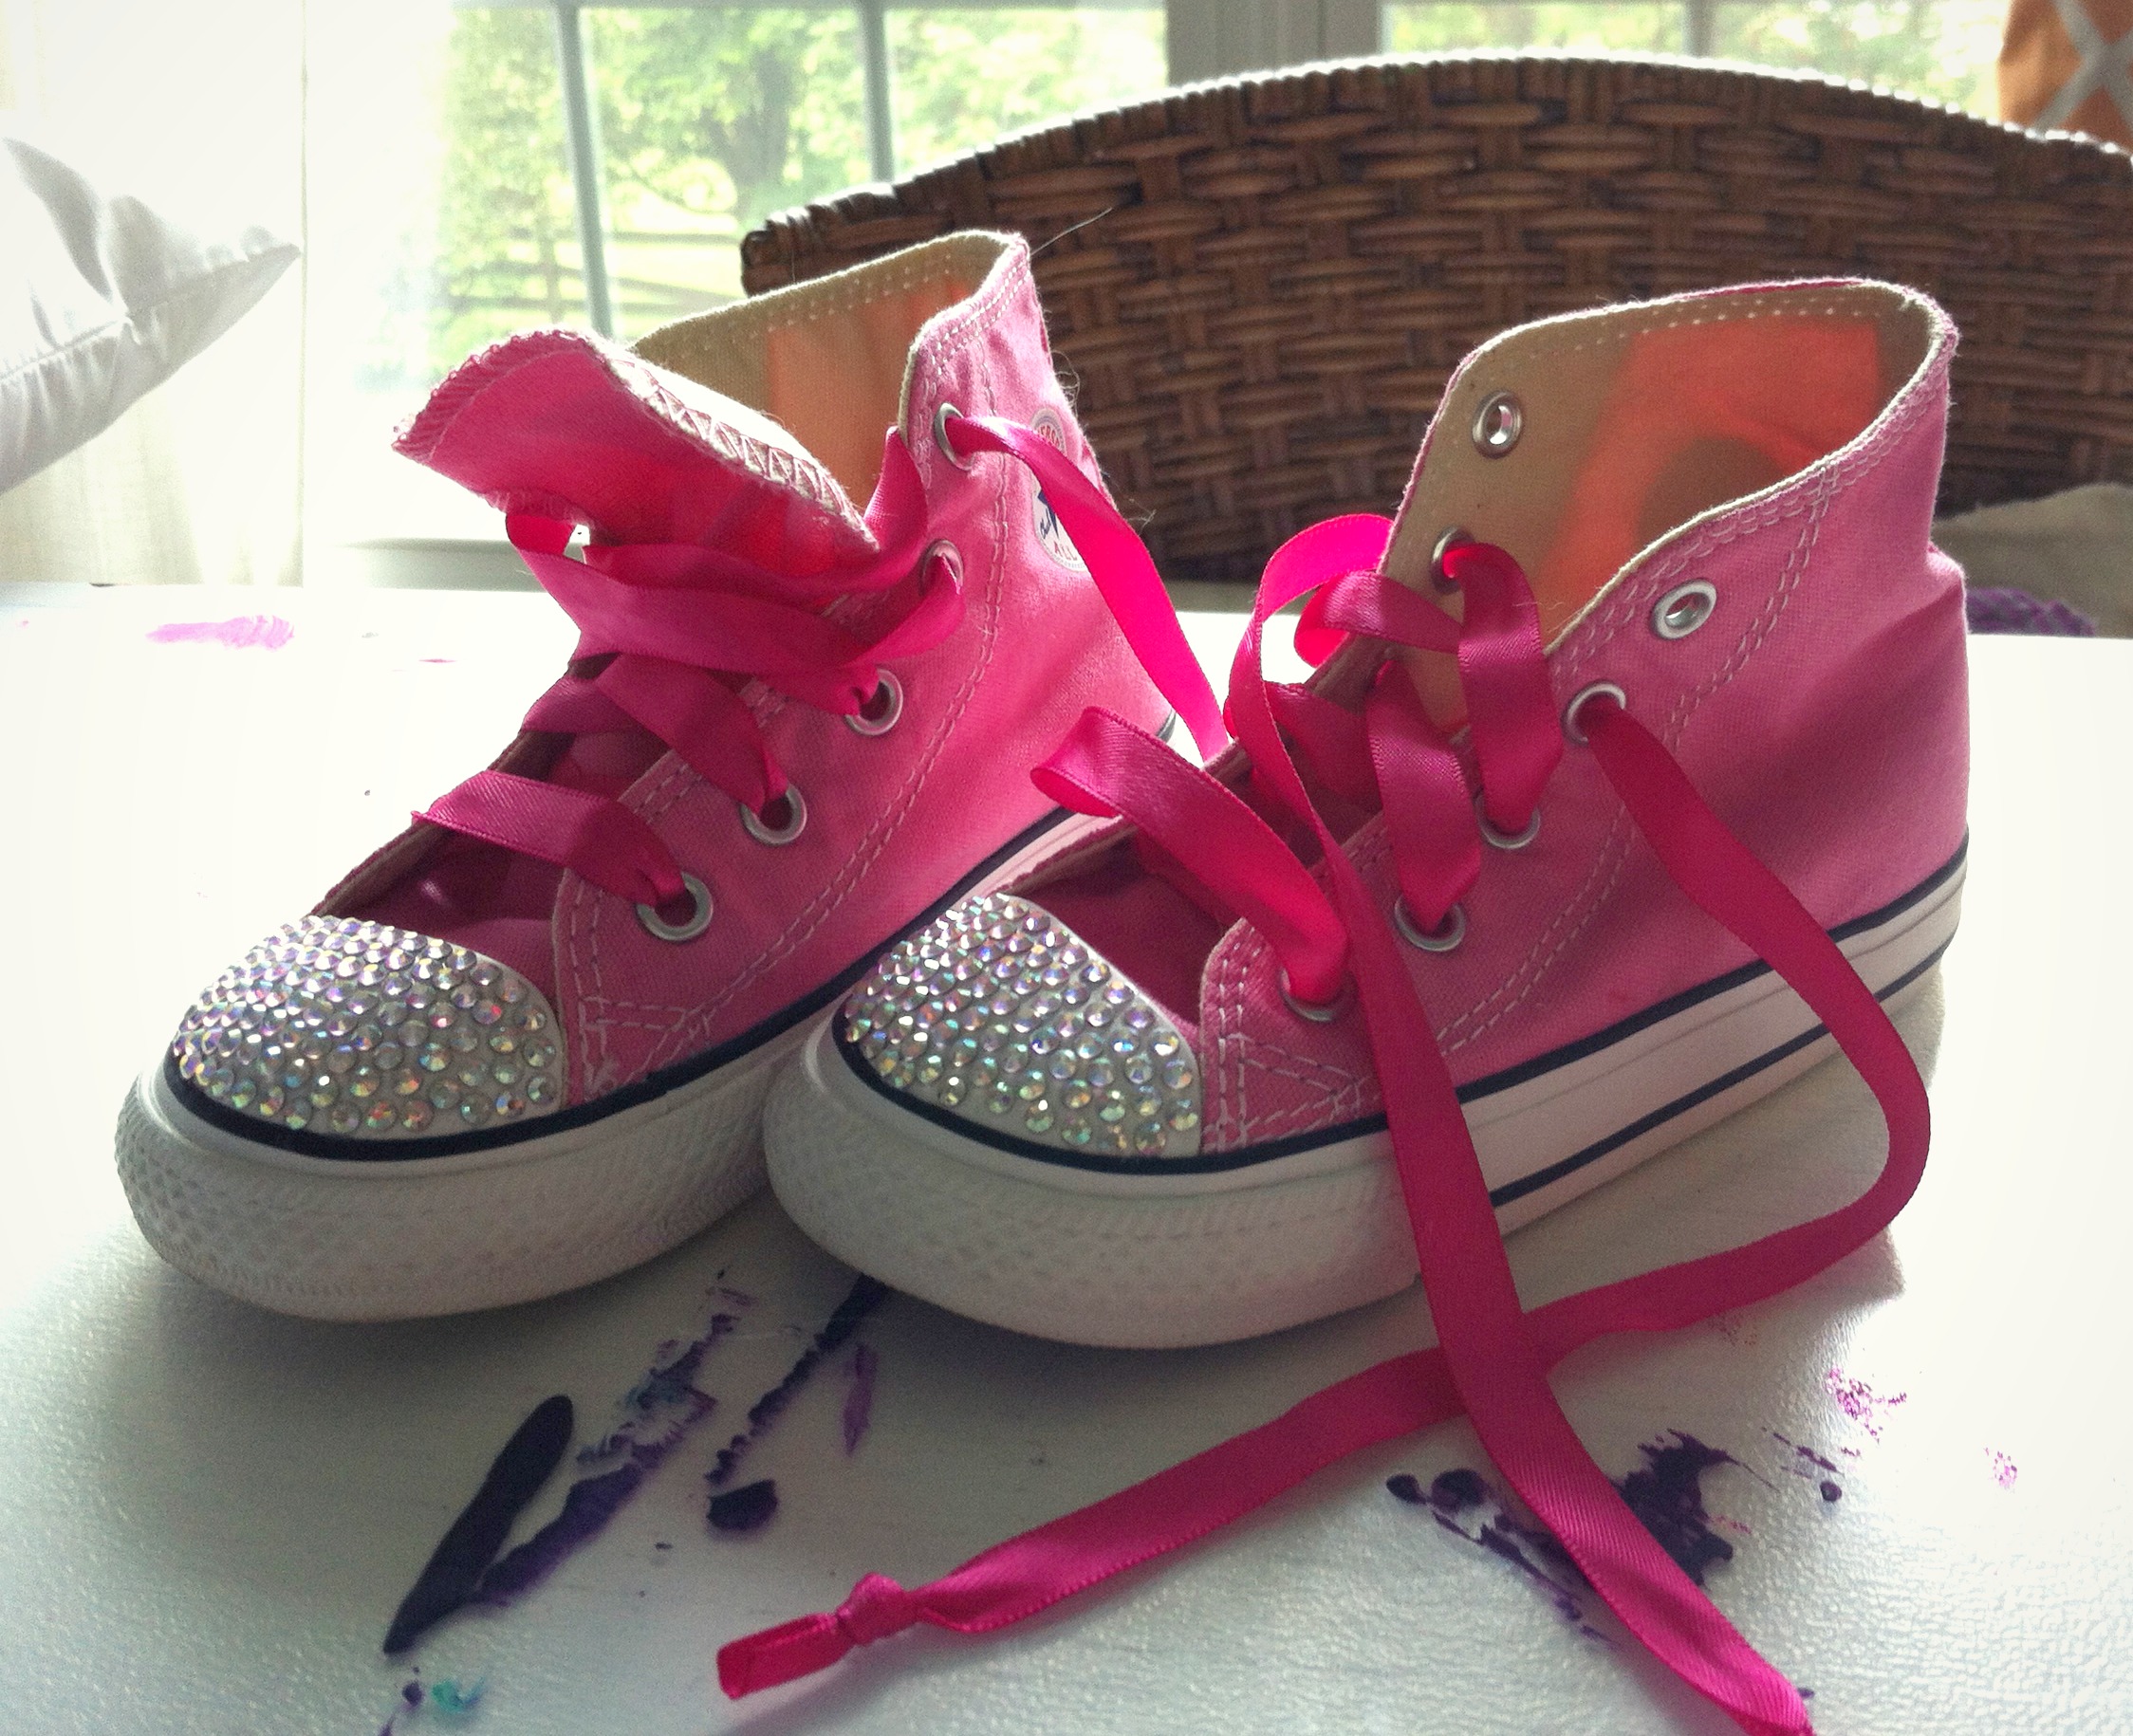 blinged out chucks